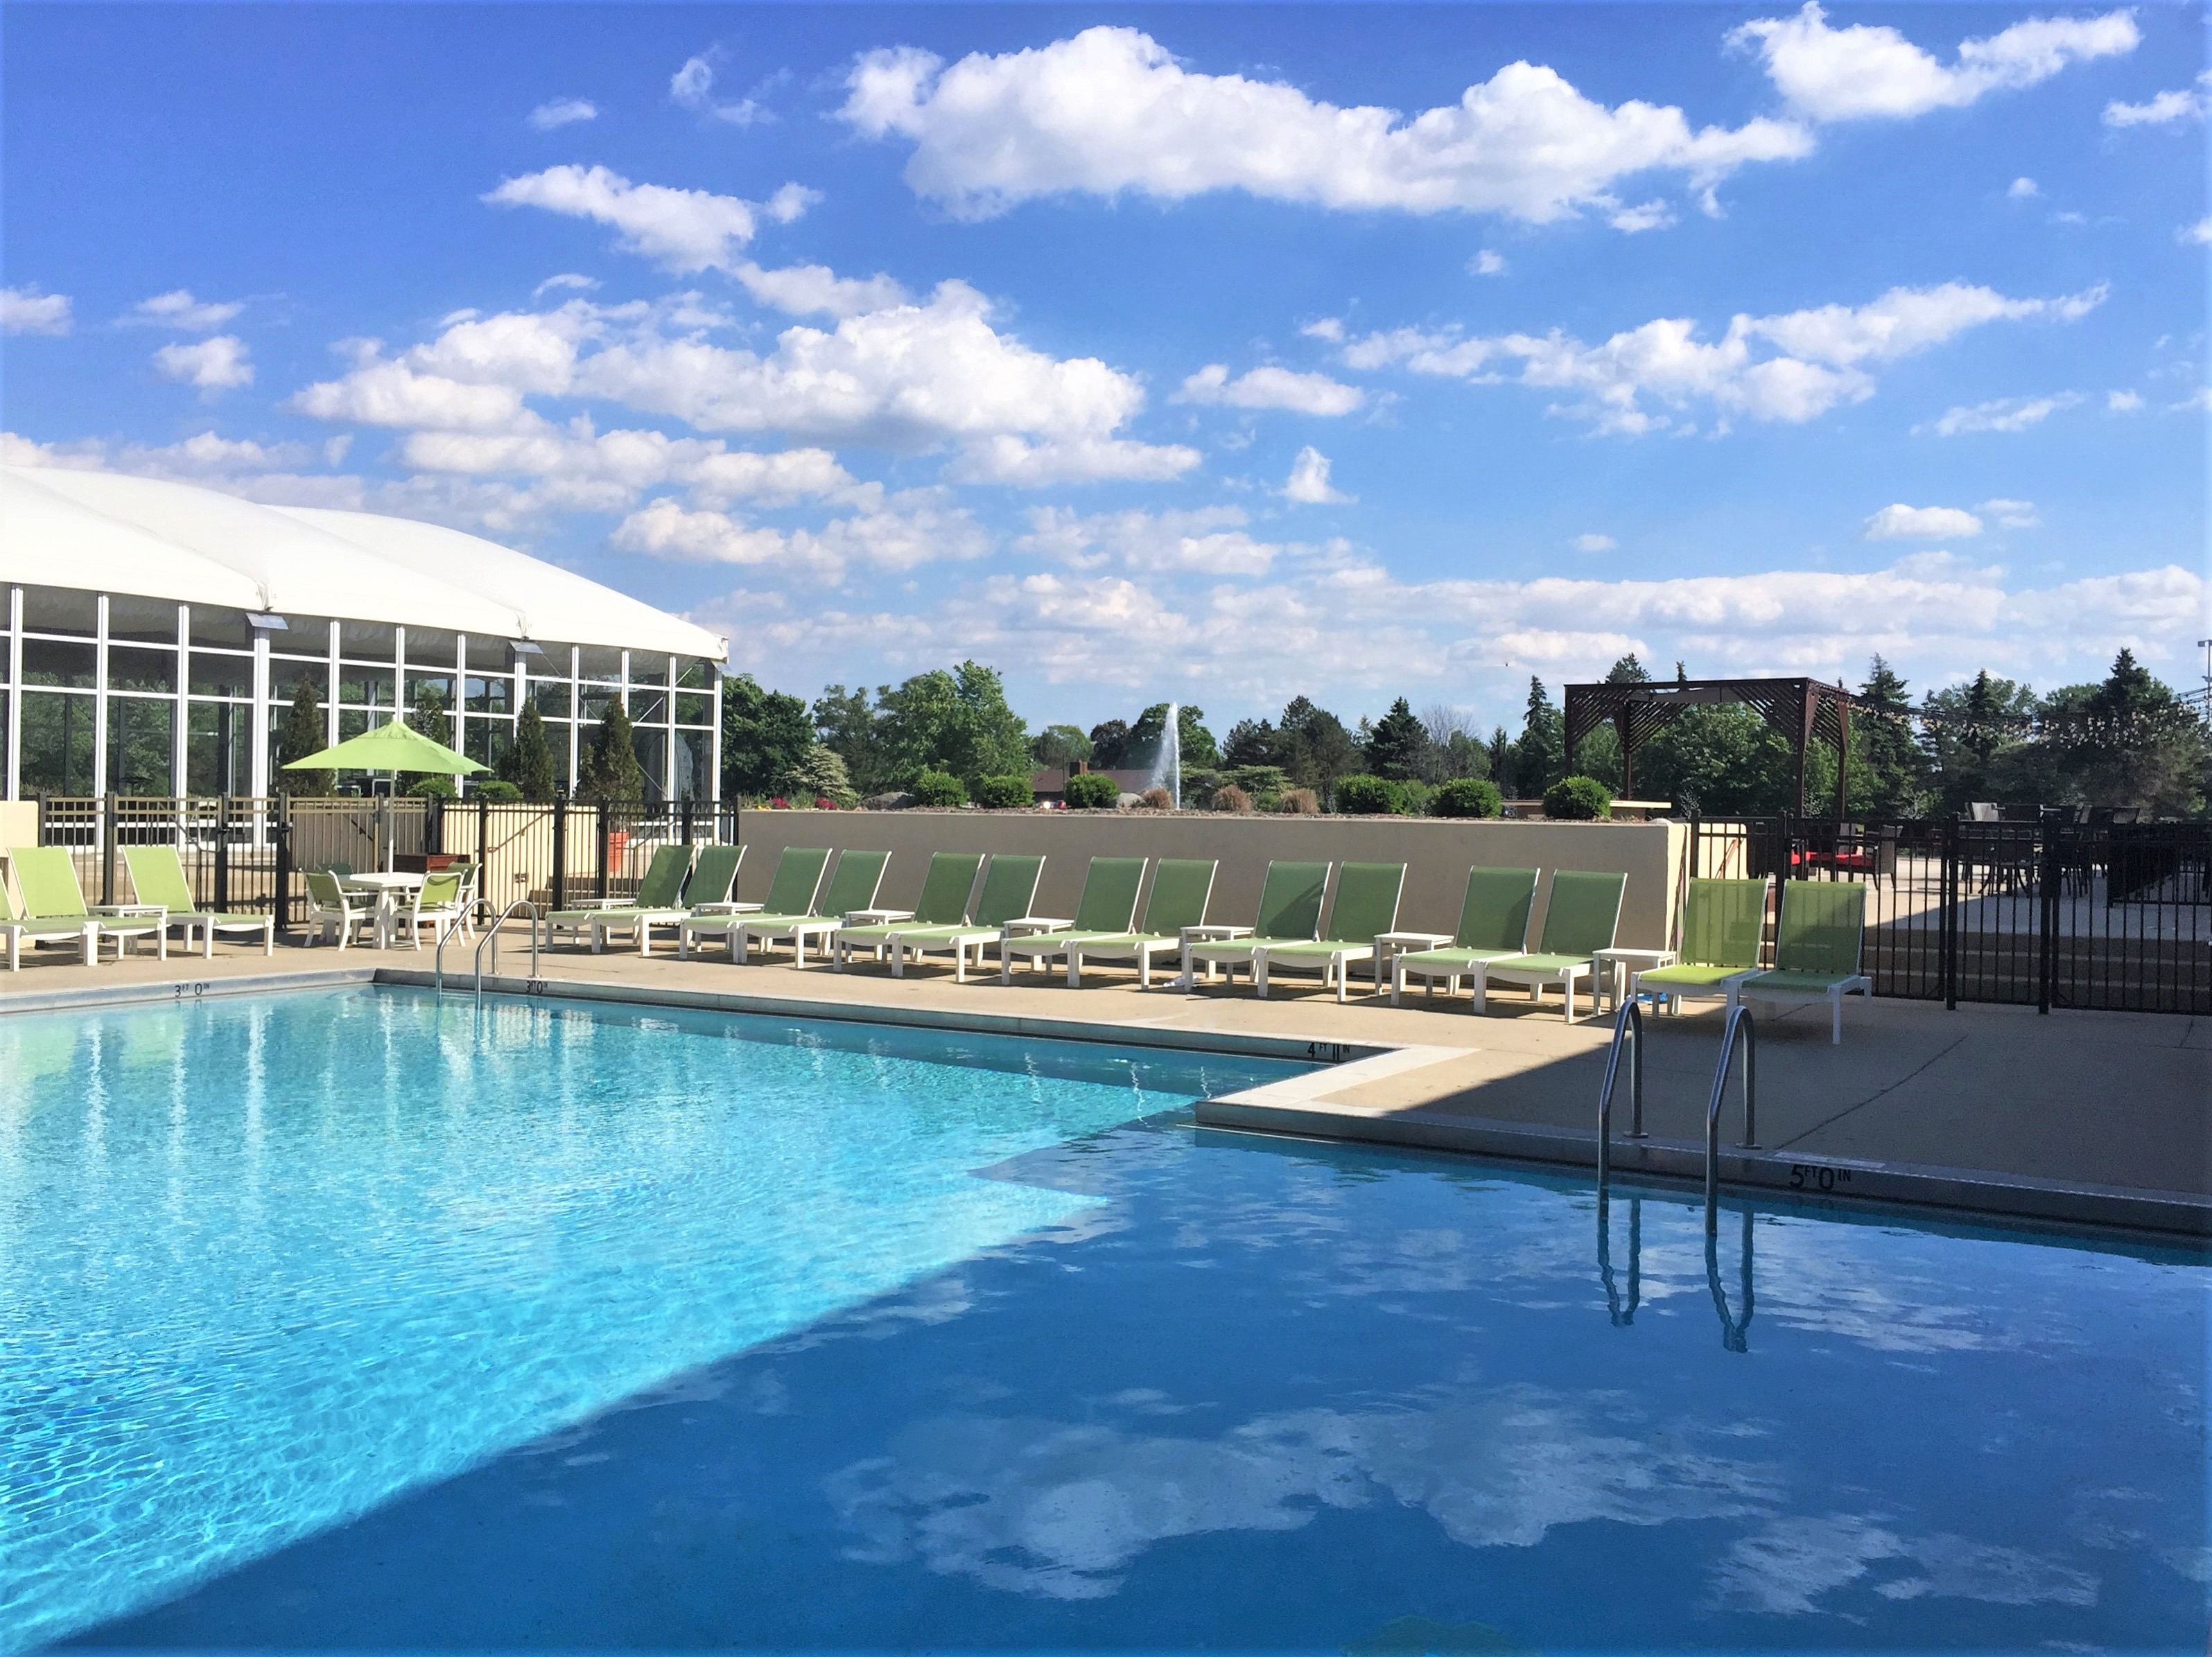 Outdoor Lakeside Plaza Pool with poolside bar service